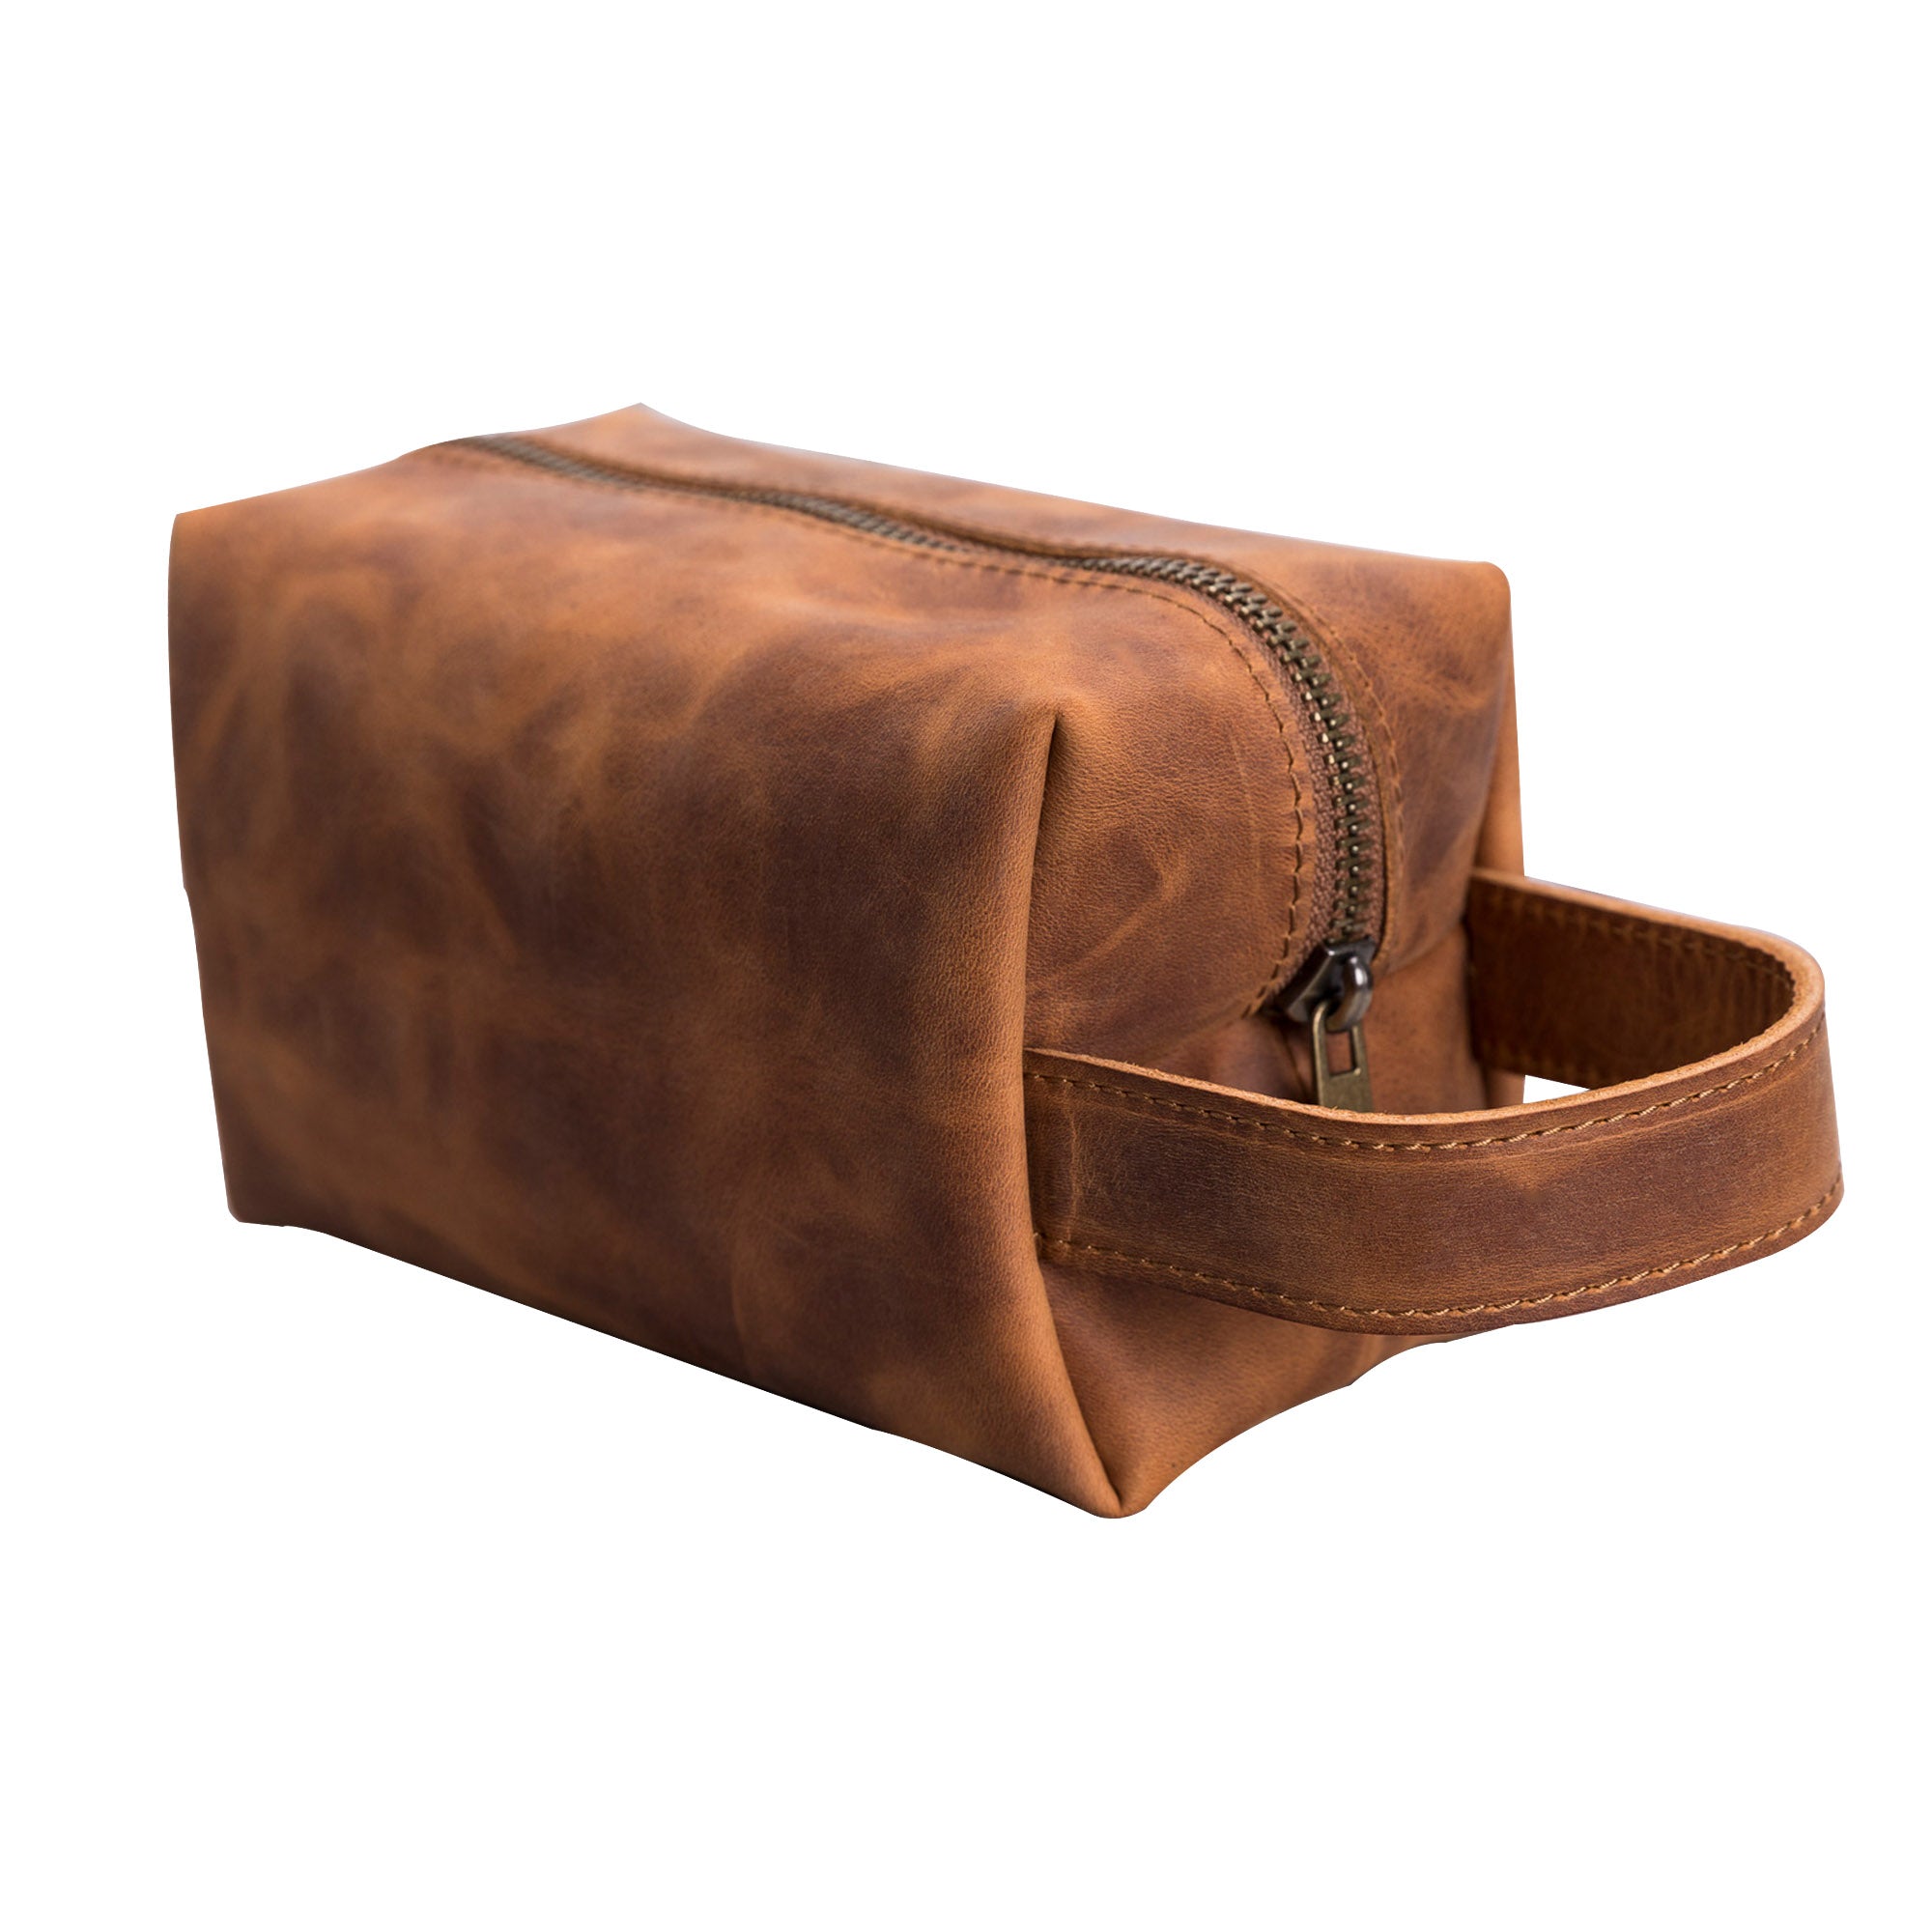 Eve Toiletry / Make Up Leather Bag (Large) - TAN - saracleather